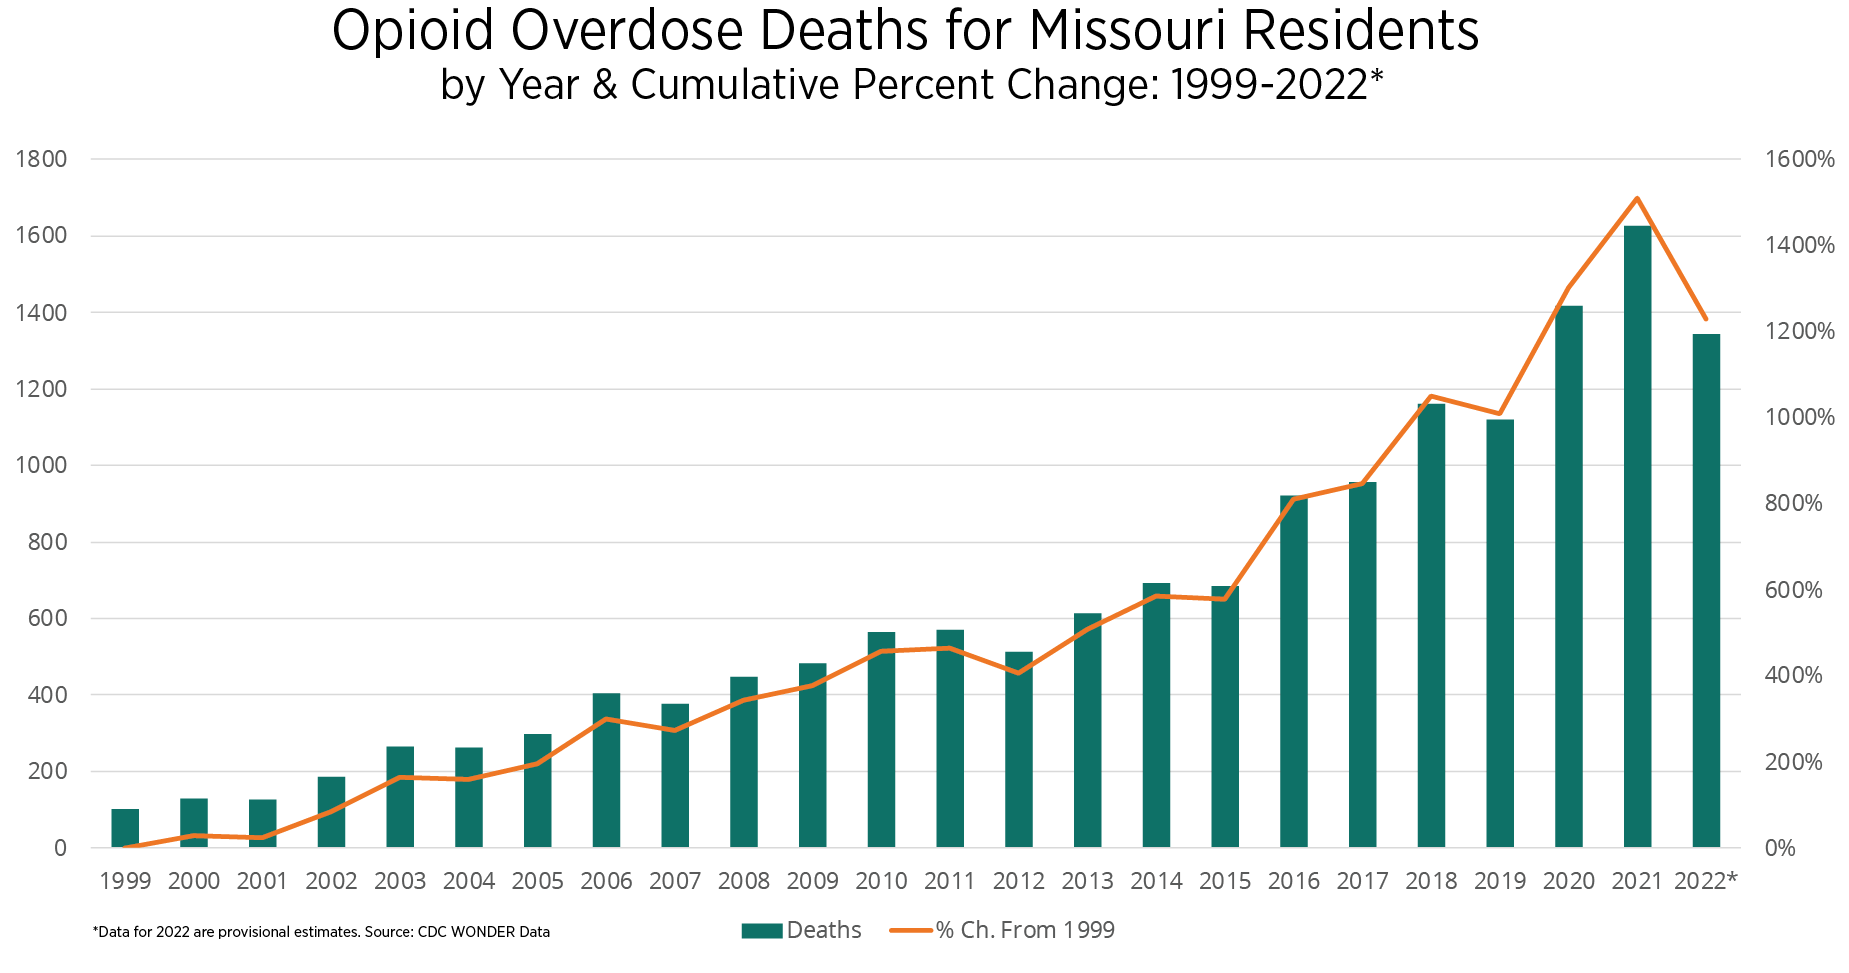 Opioid overdose deaths for Missouri residents by year and percent change